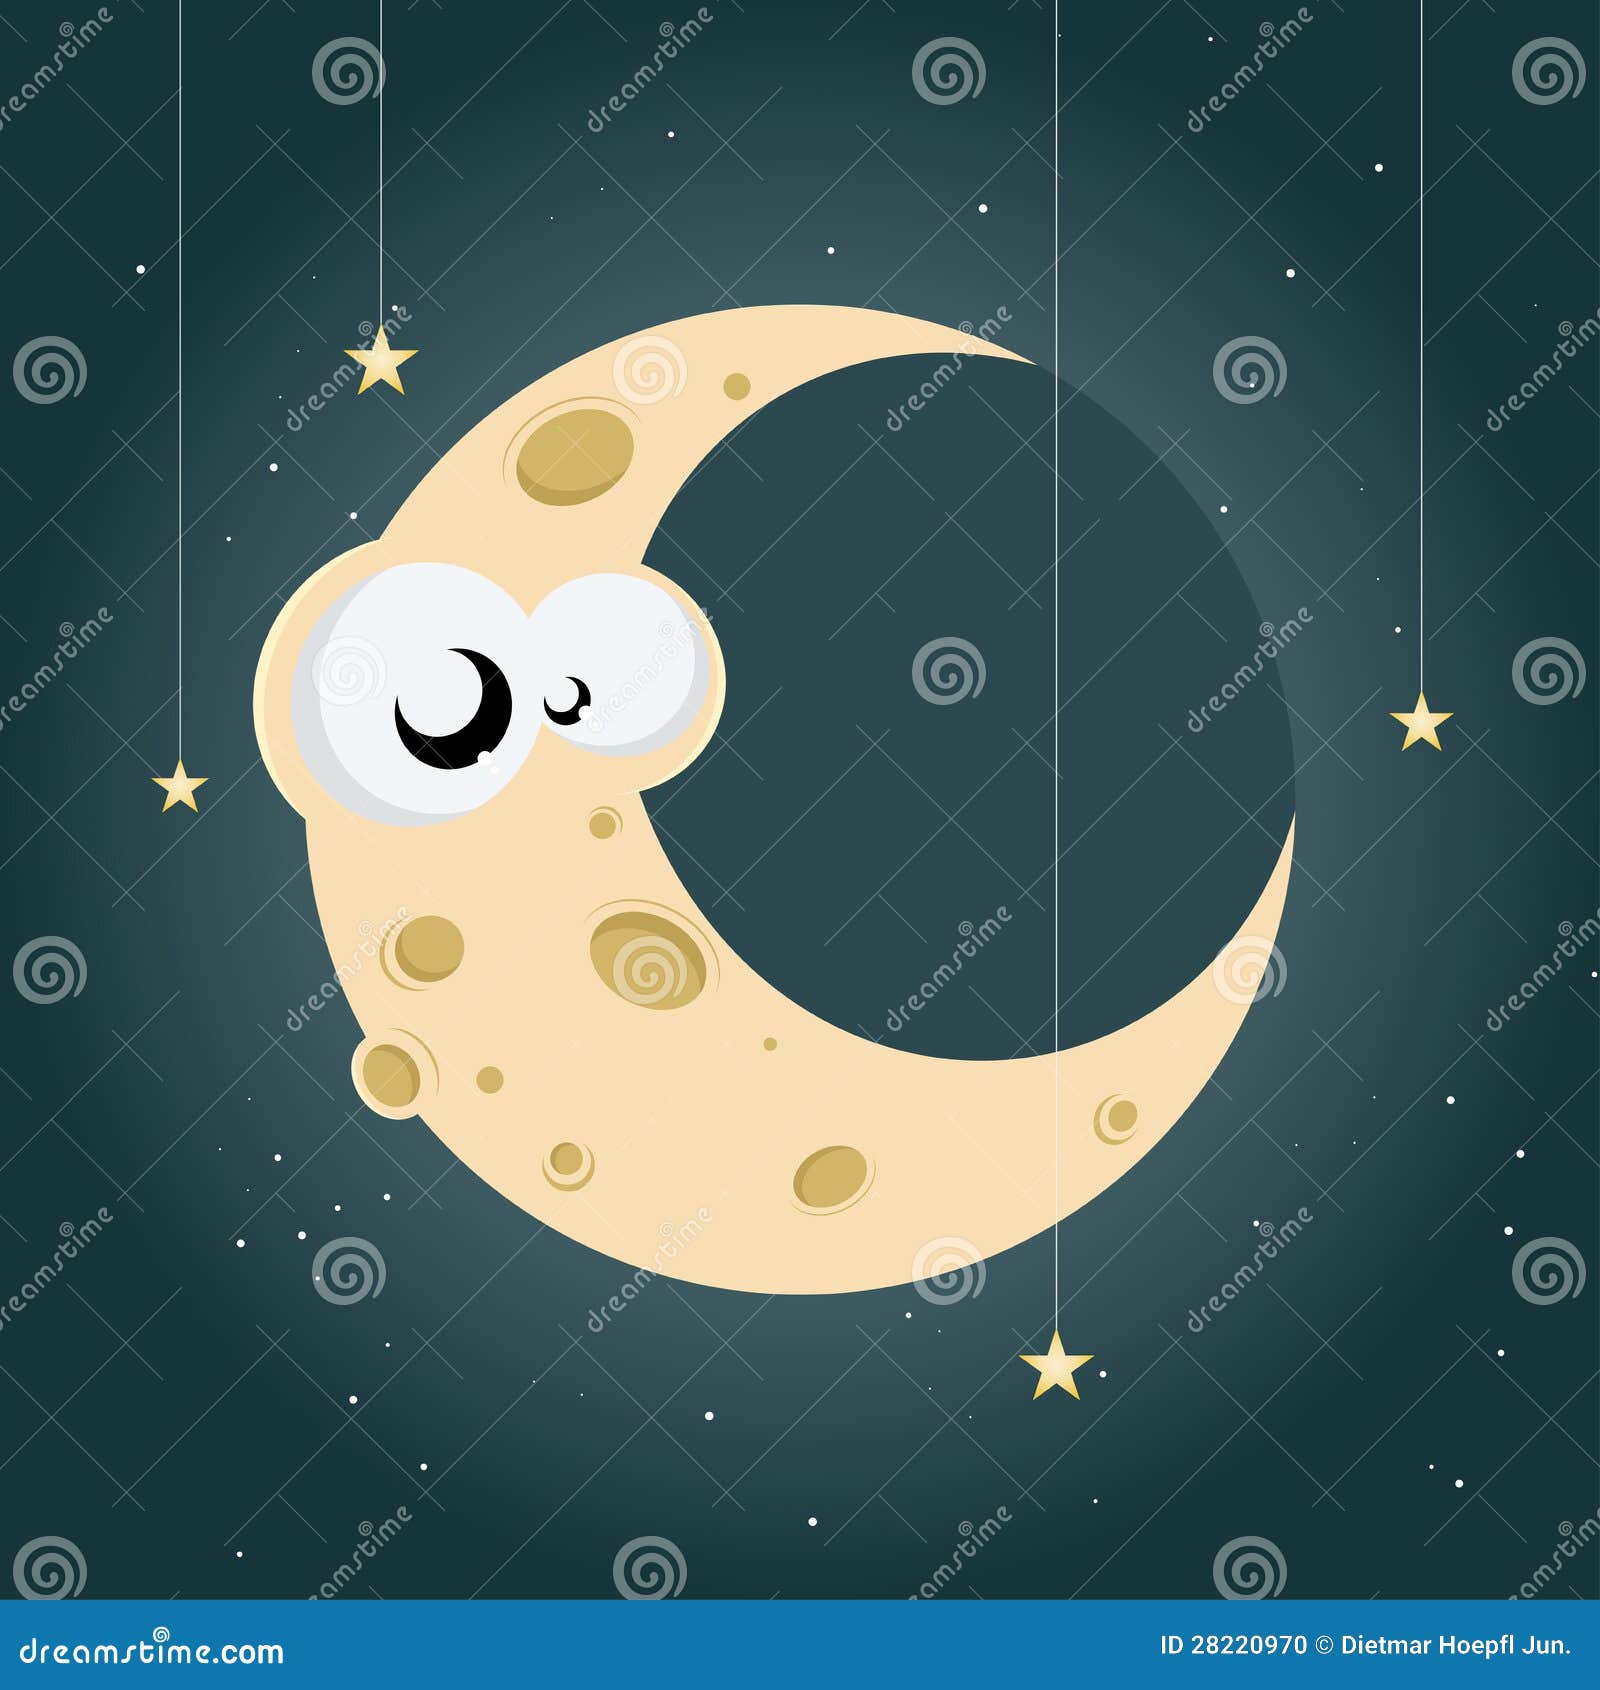 Cartoon Moon With Star And Cloud. Vector Illustration Isolated On White ...